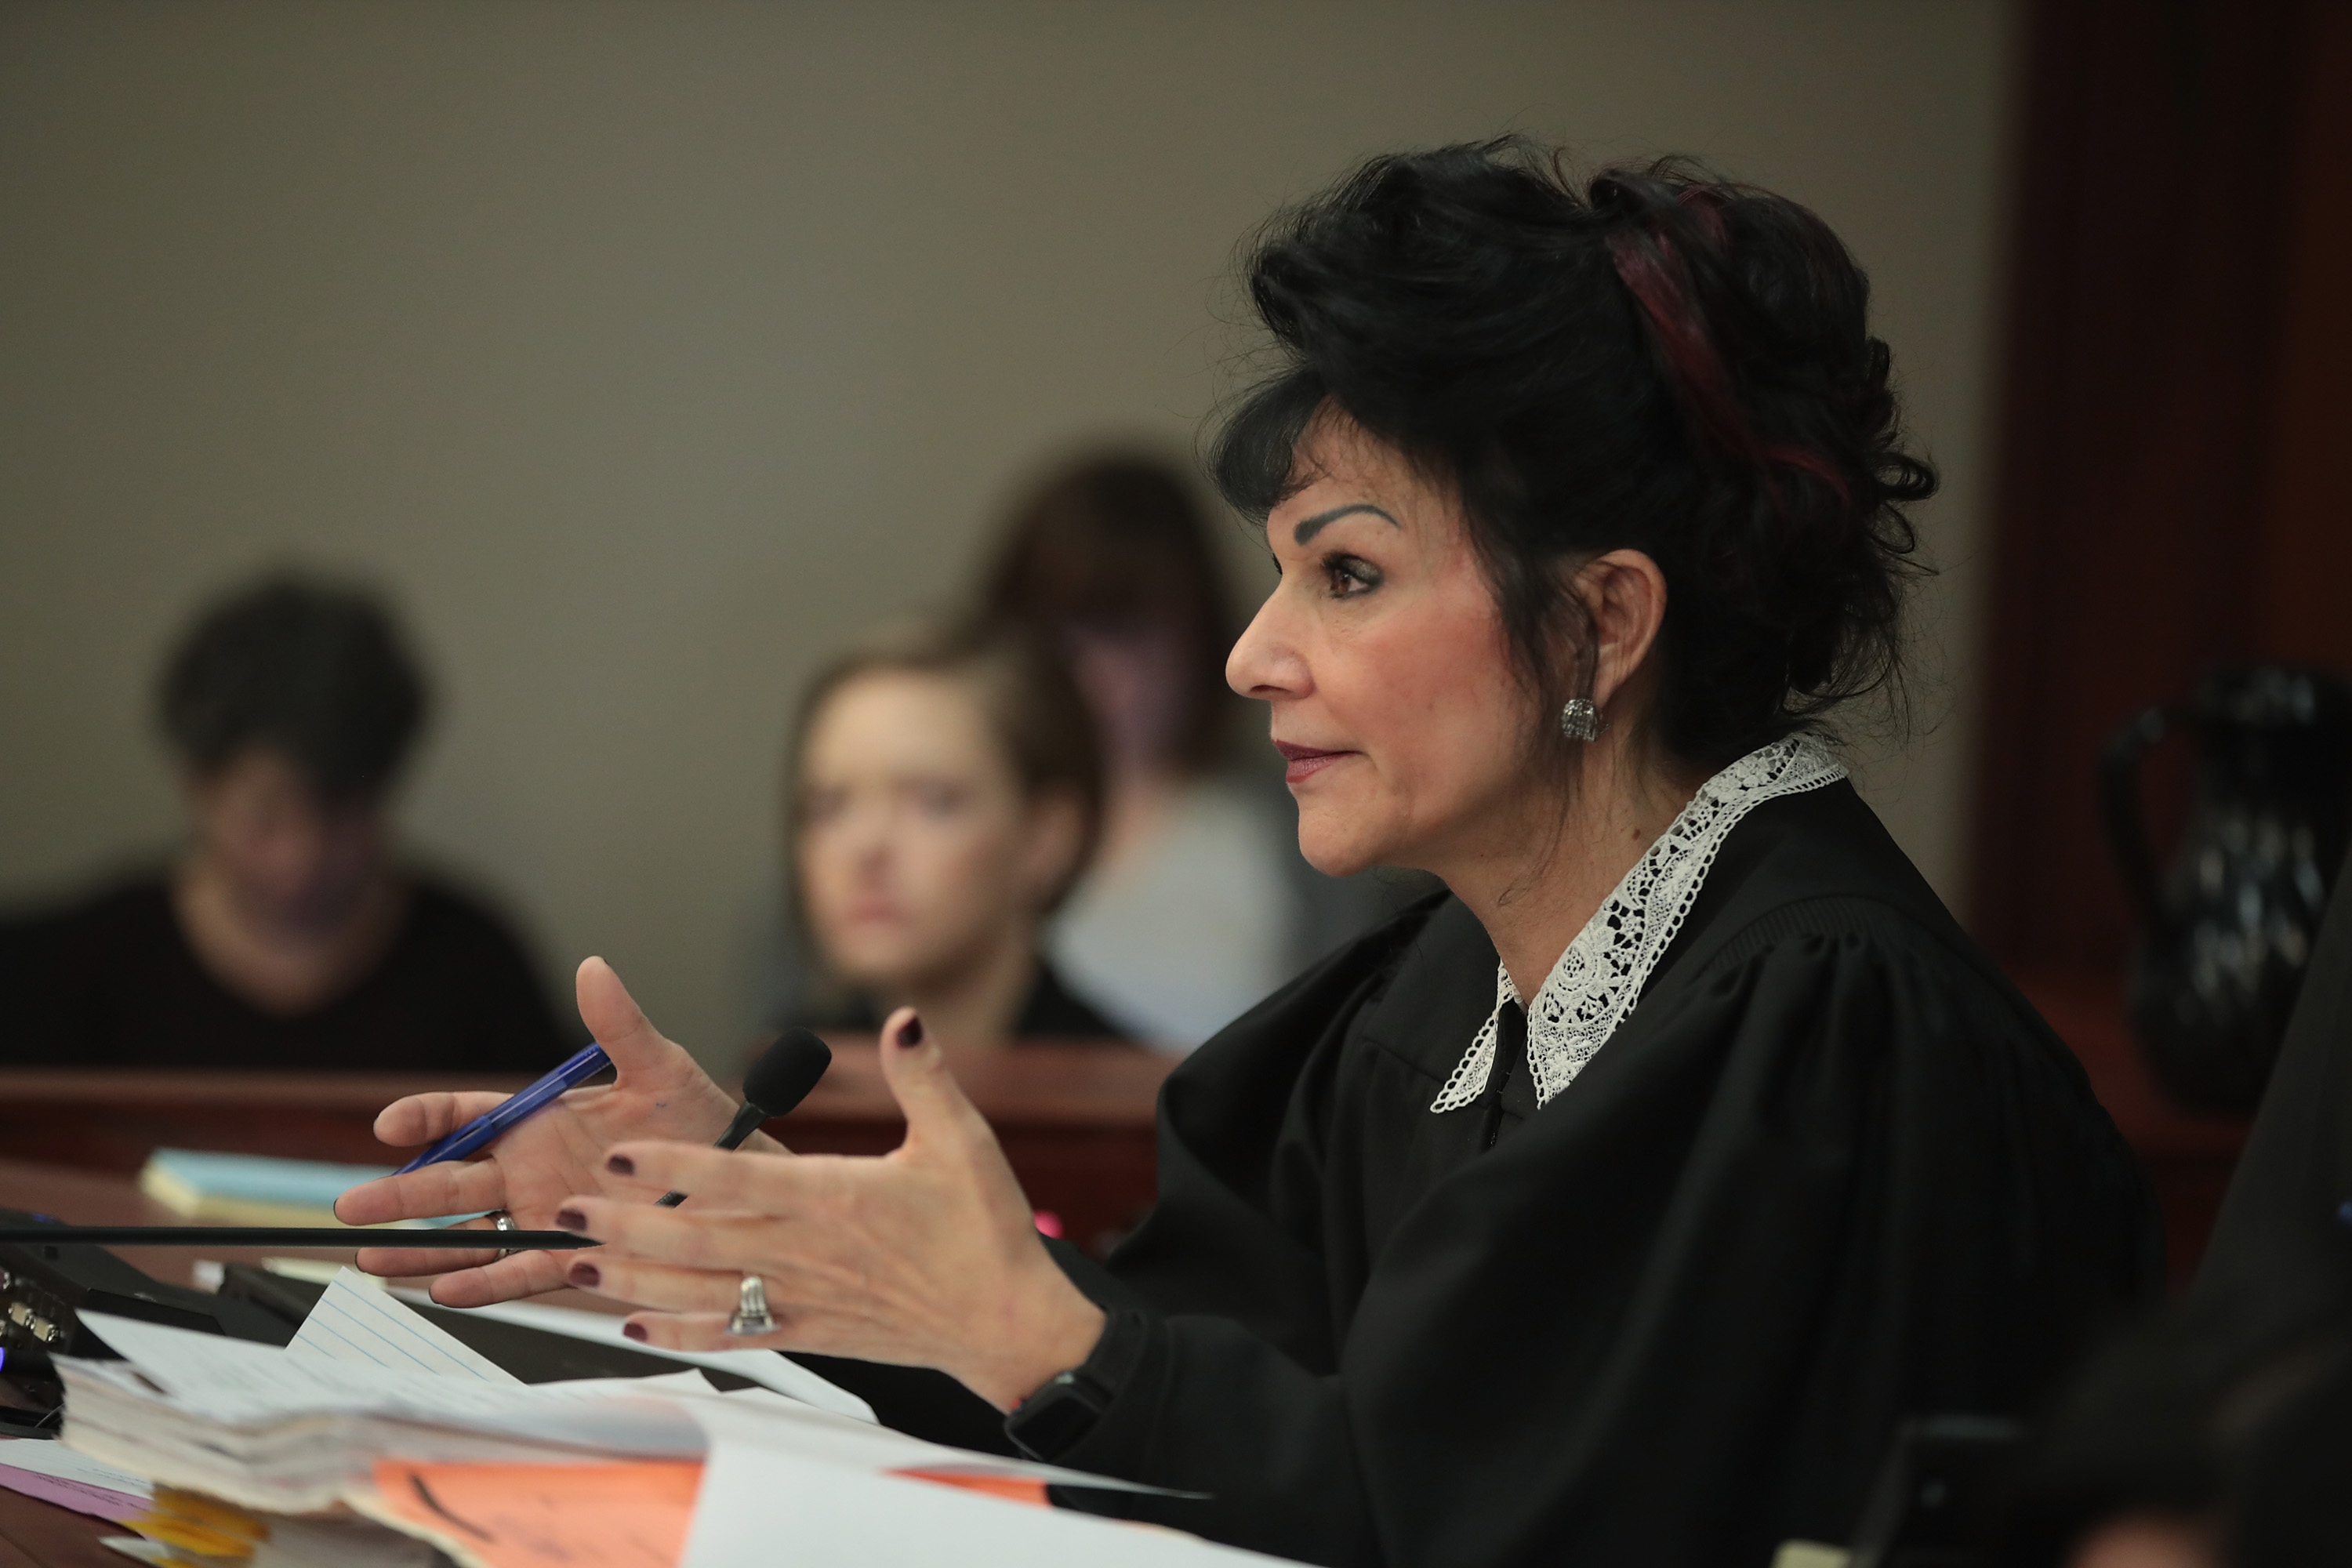 LANSING, MI - JANUARY 16: Judge Rosemarie Aquilina speaks at a sentencing hearing for Larry Nassar for molesting about 100 girls while he was a physician for USA Gymnastics and Michigan State University, where he had his sports-medicine practice on January 16, 2018 in Lansing, Michigan. (Photo by Scott Olson/Getty Images) (Scott Olson—Getty Images)